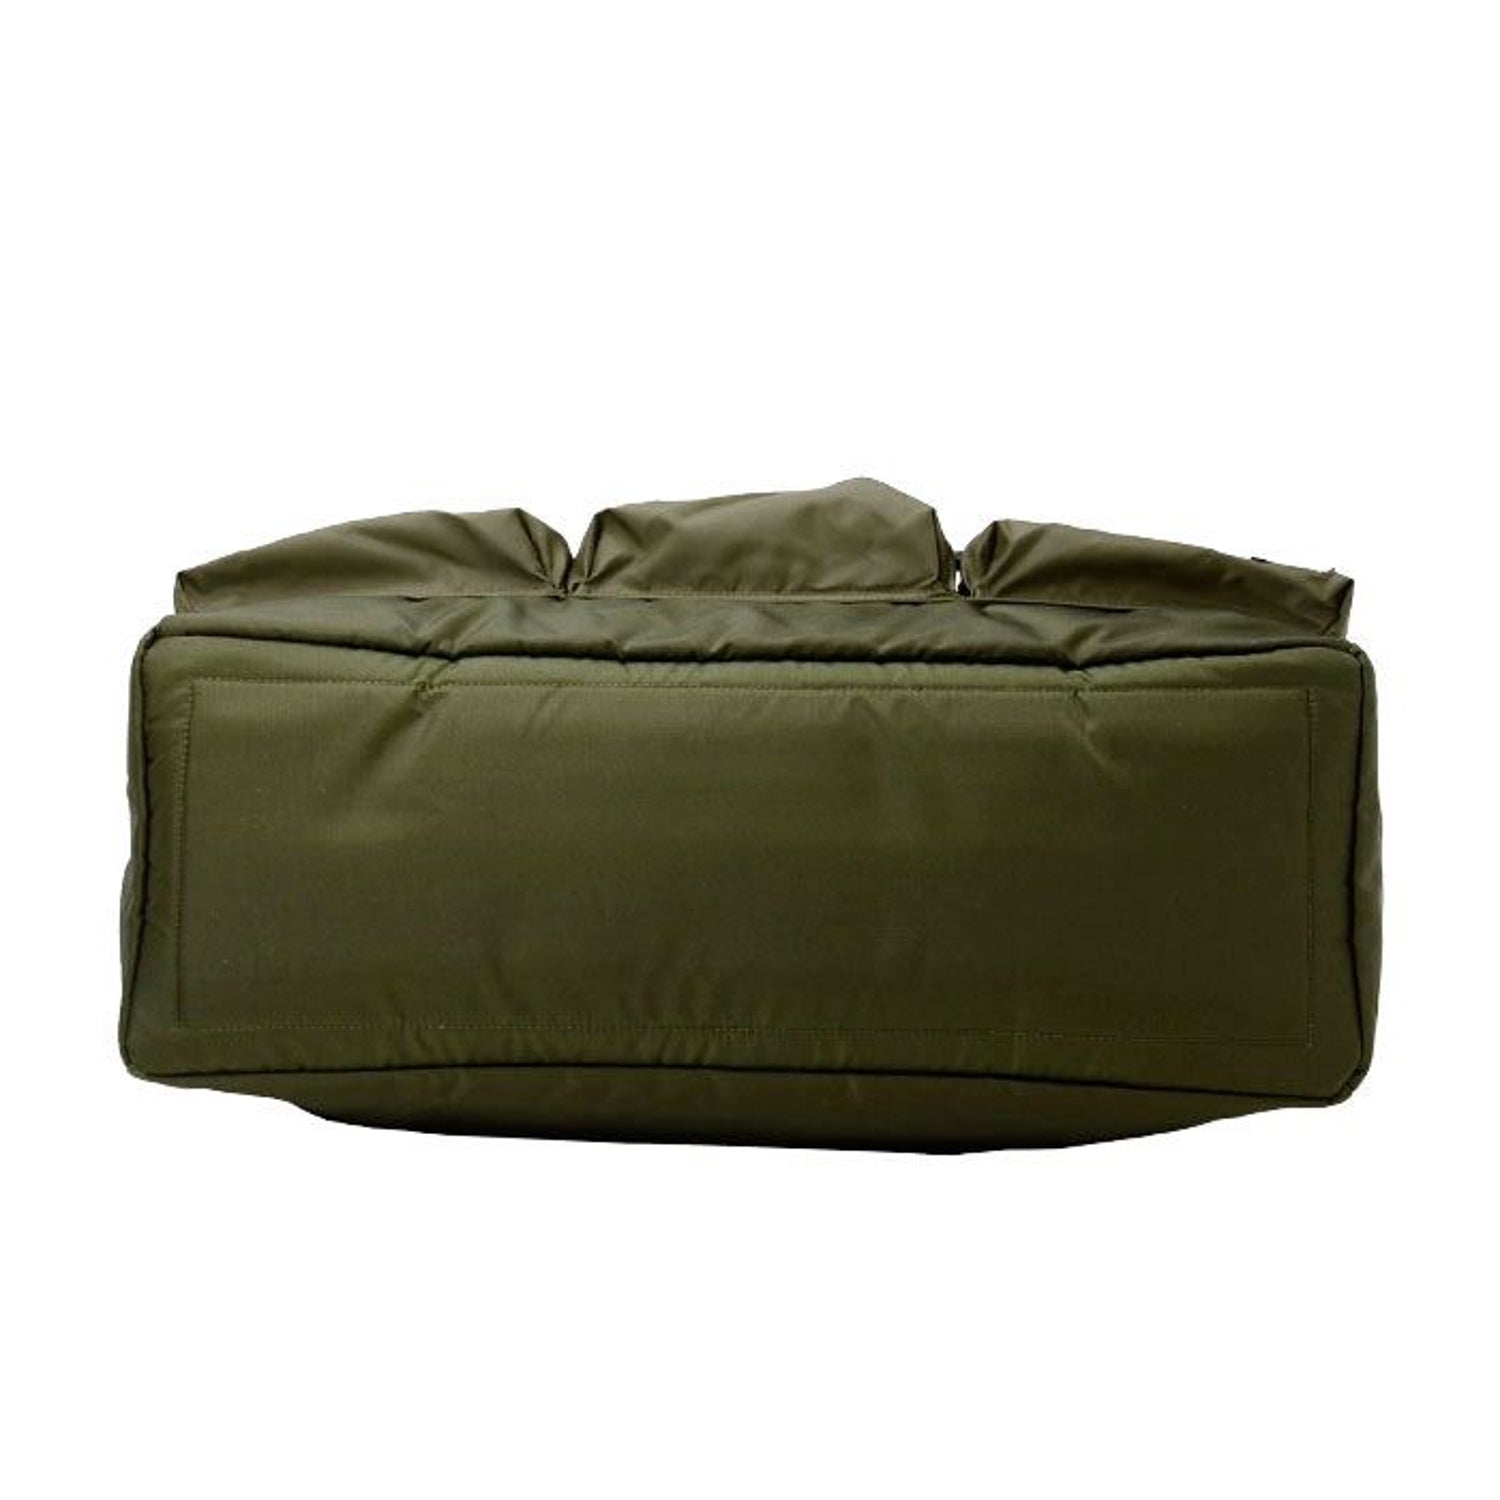 Porter Force 2Way Duffle Bag Olive Drab - BAGS - Canada